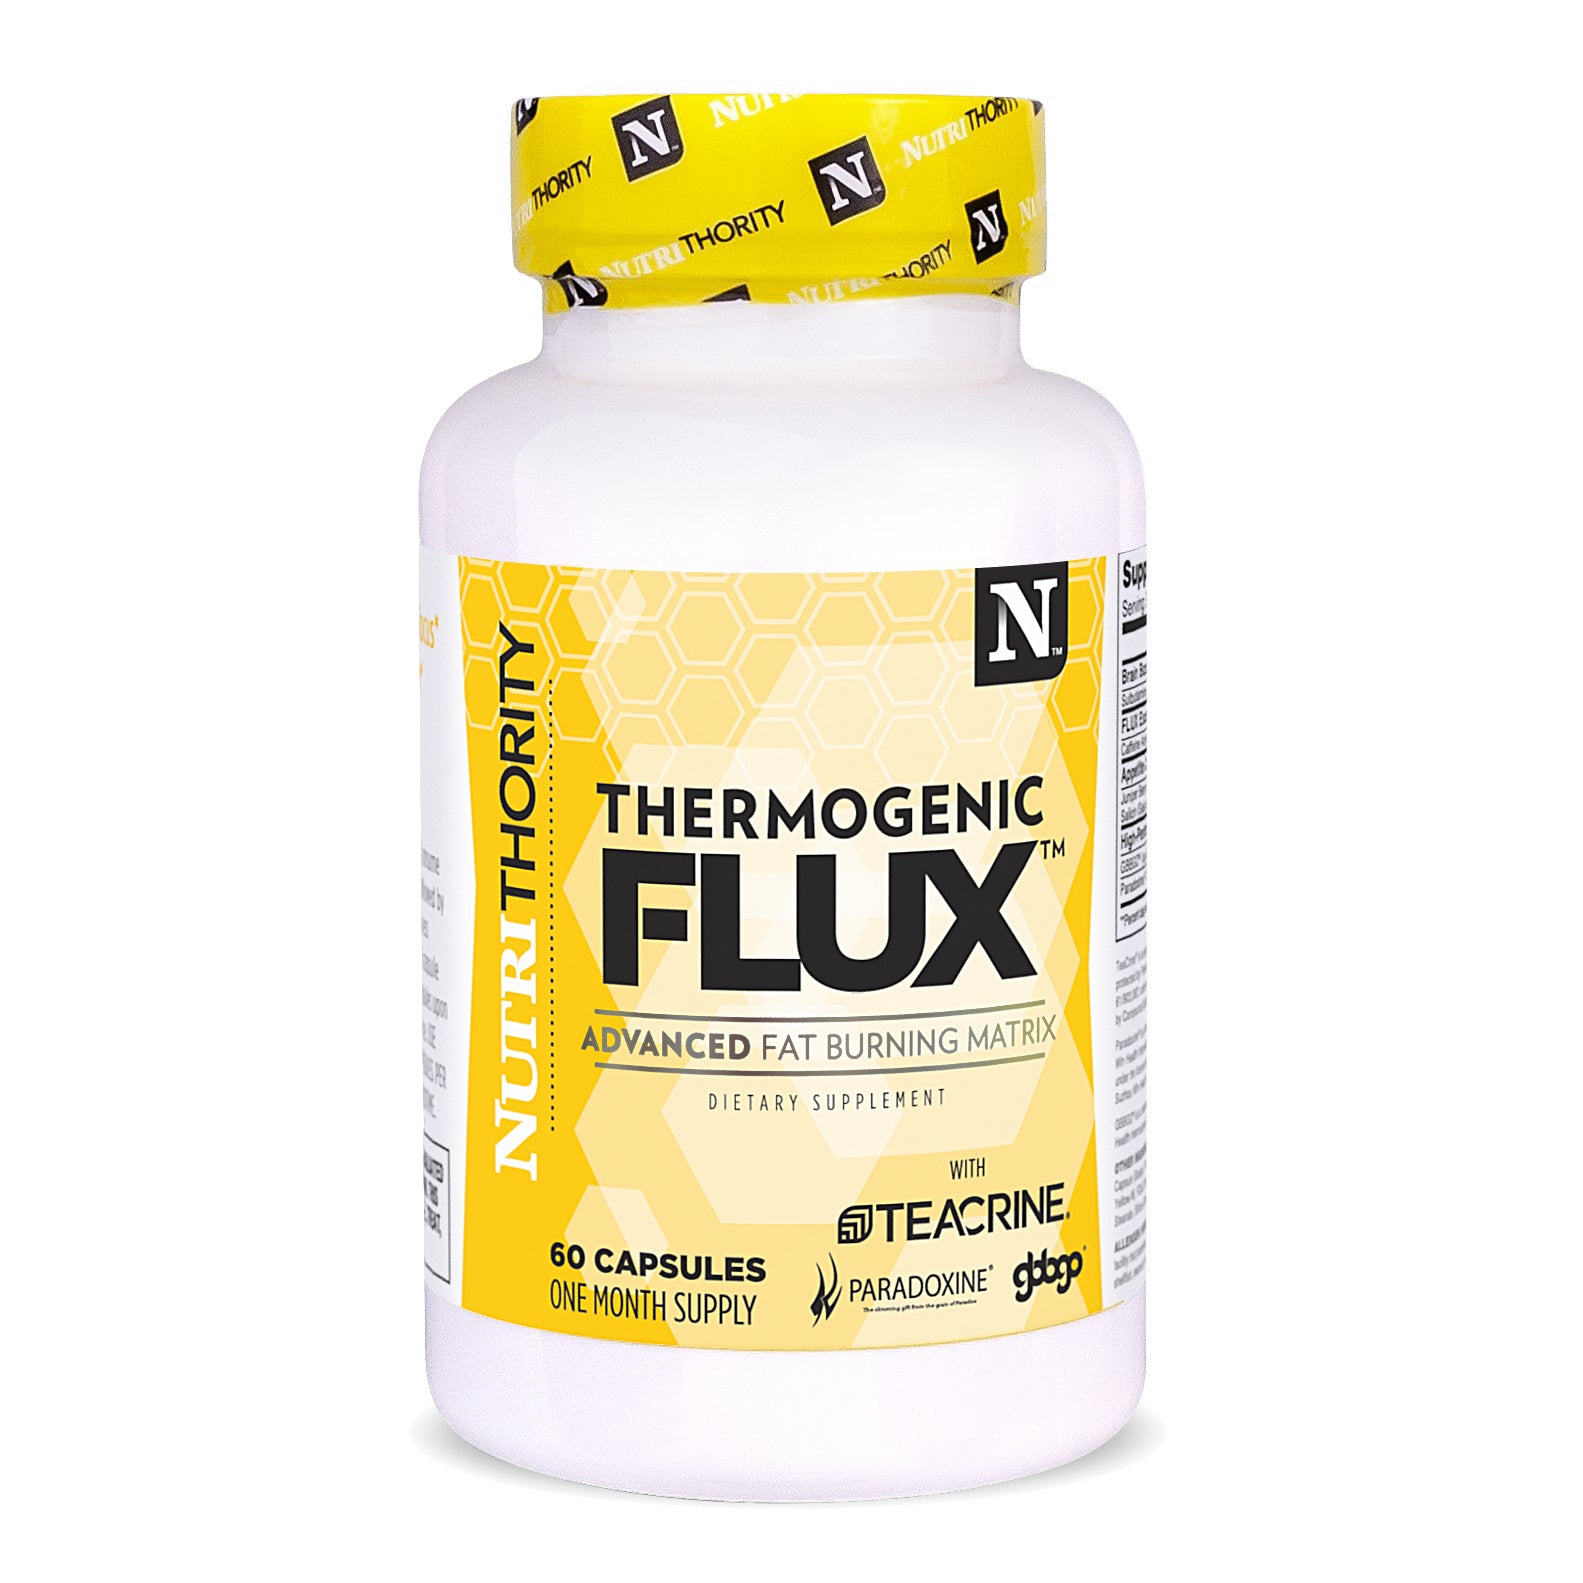 Thermogenic supplements for enhanced thermogenic effect